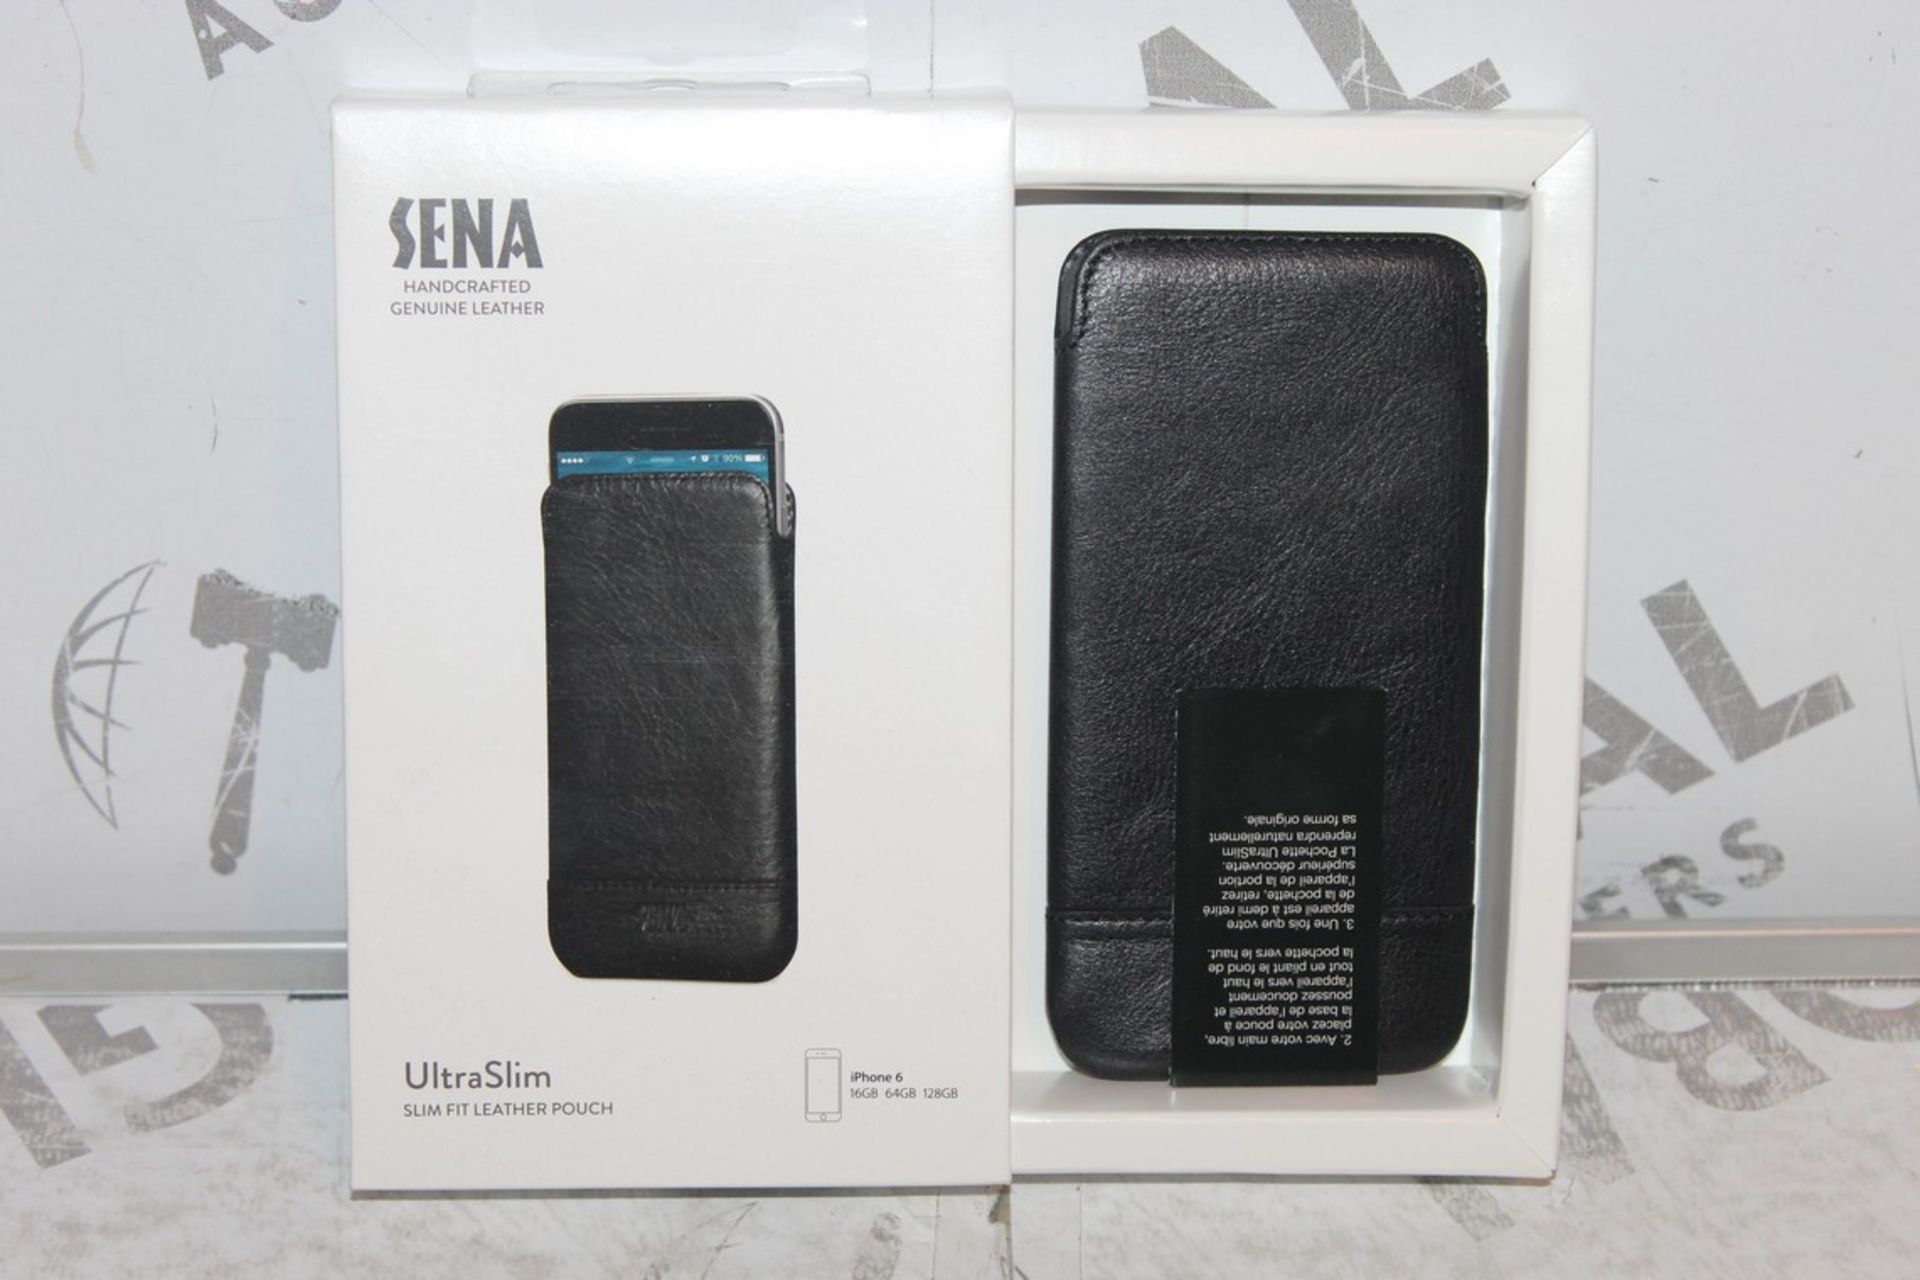 Lot to Contain, 10 Boxed Brand-new Sena, Hand crafted Genuine Leather, Slim fit Leather Pouched